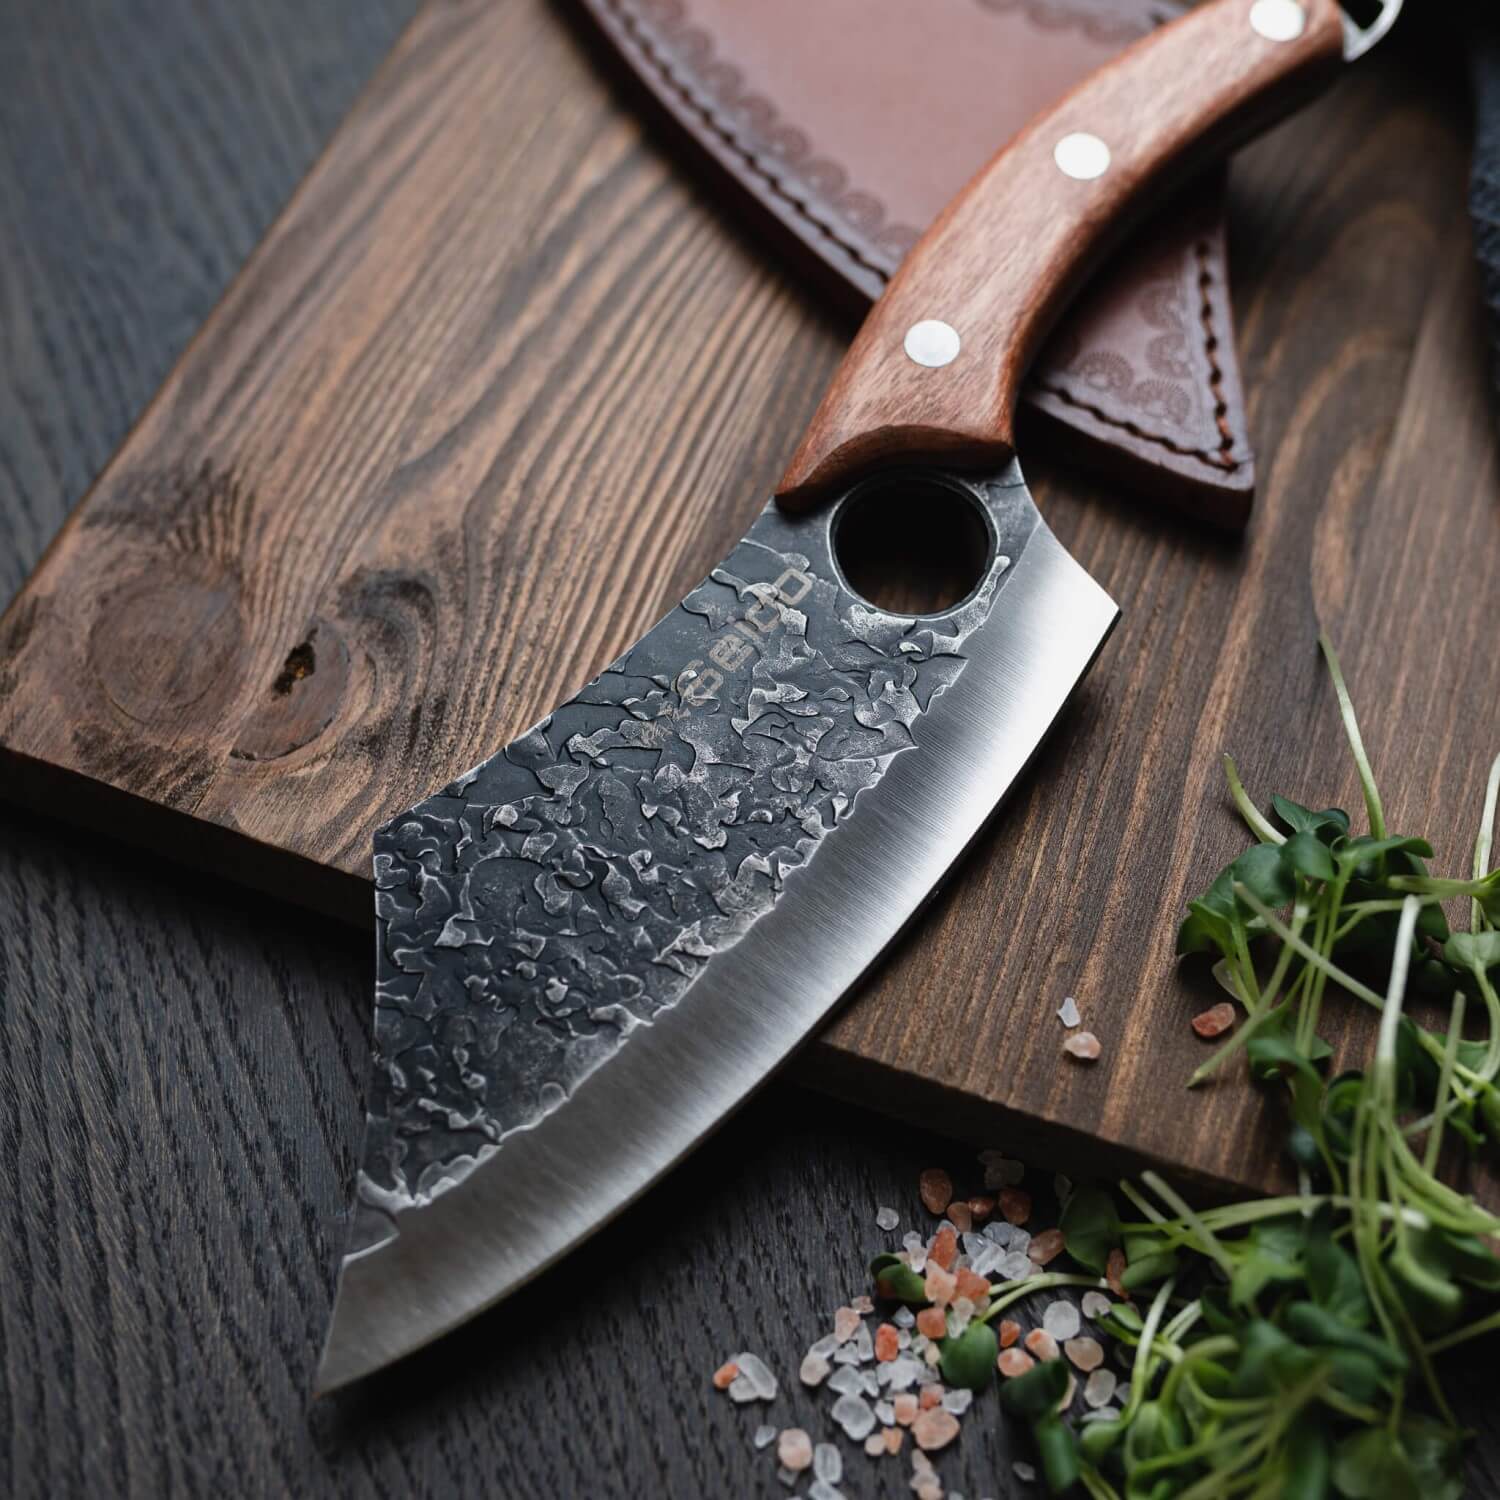 Our Search For The Best Camping Chef Knife